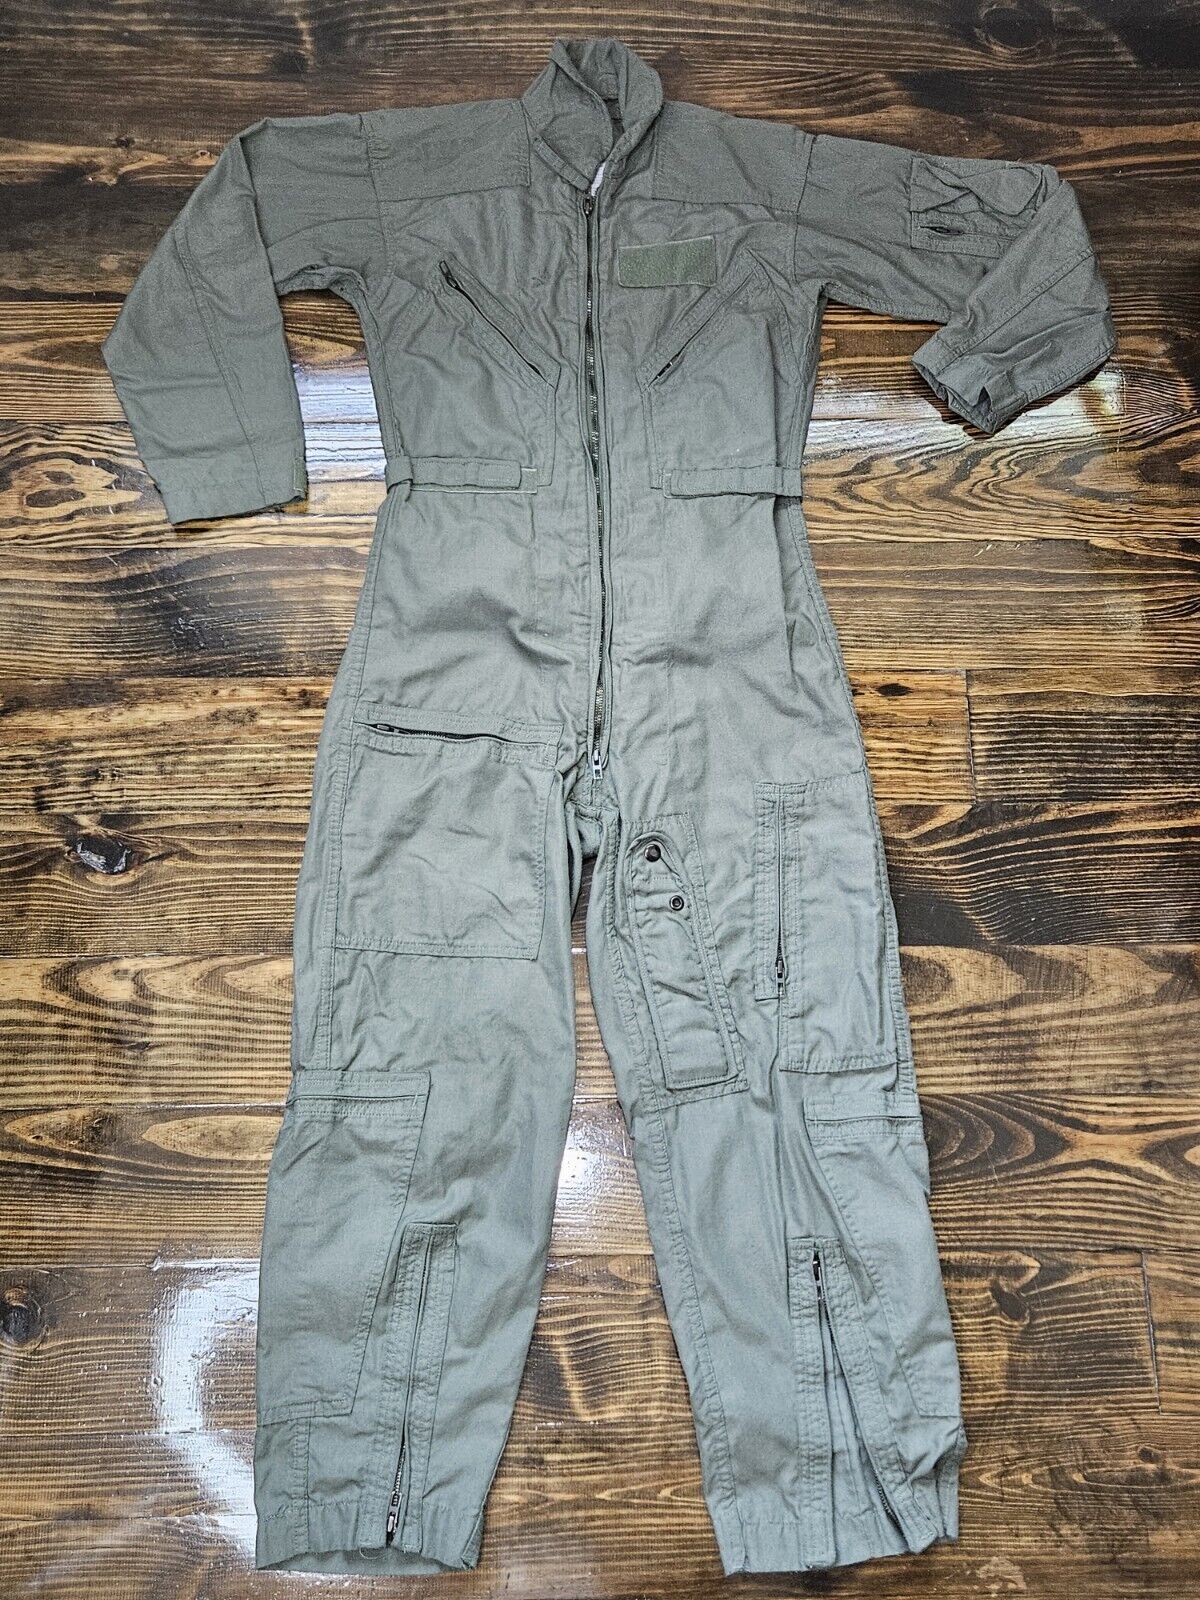 USAF Military CWU-27/P Flyers Coveralls Flight Suit Uniform Mens Size Small 36